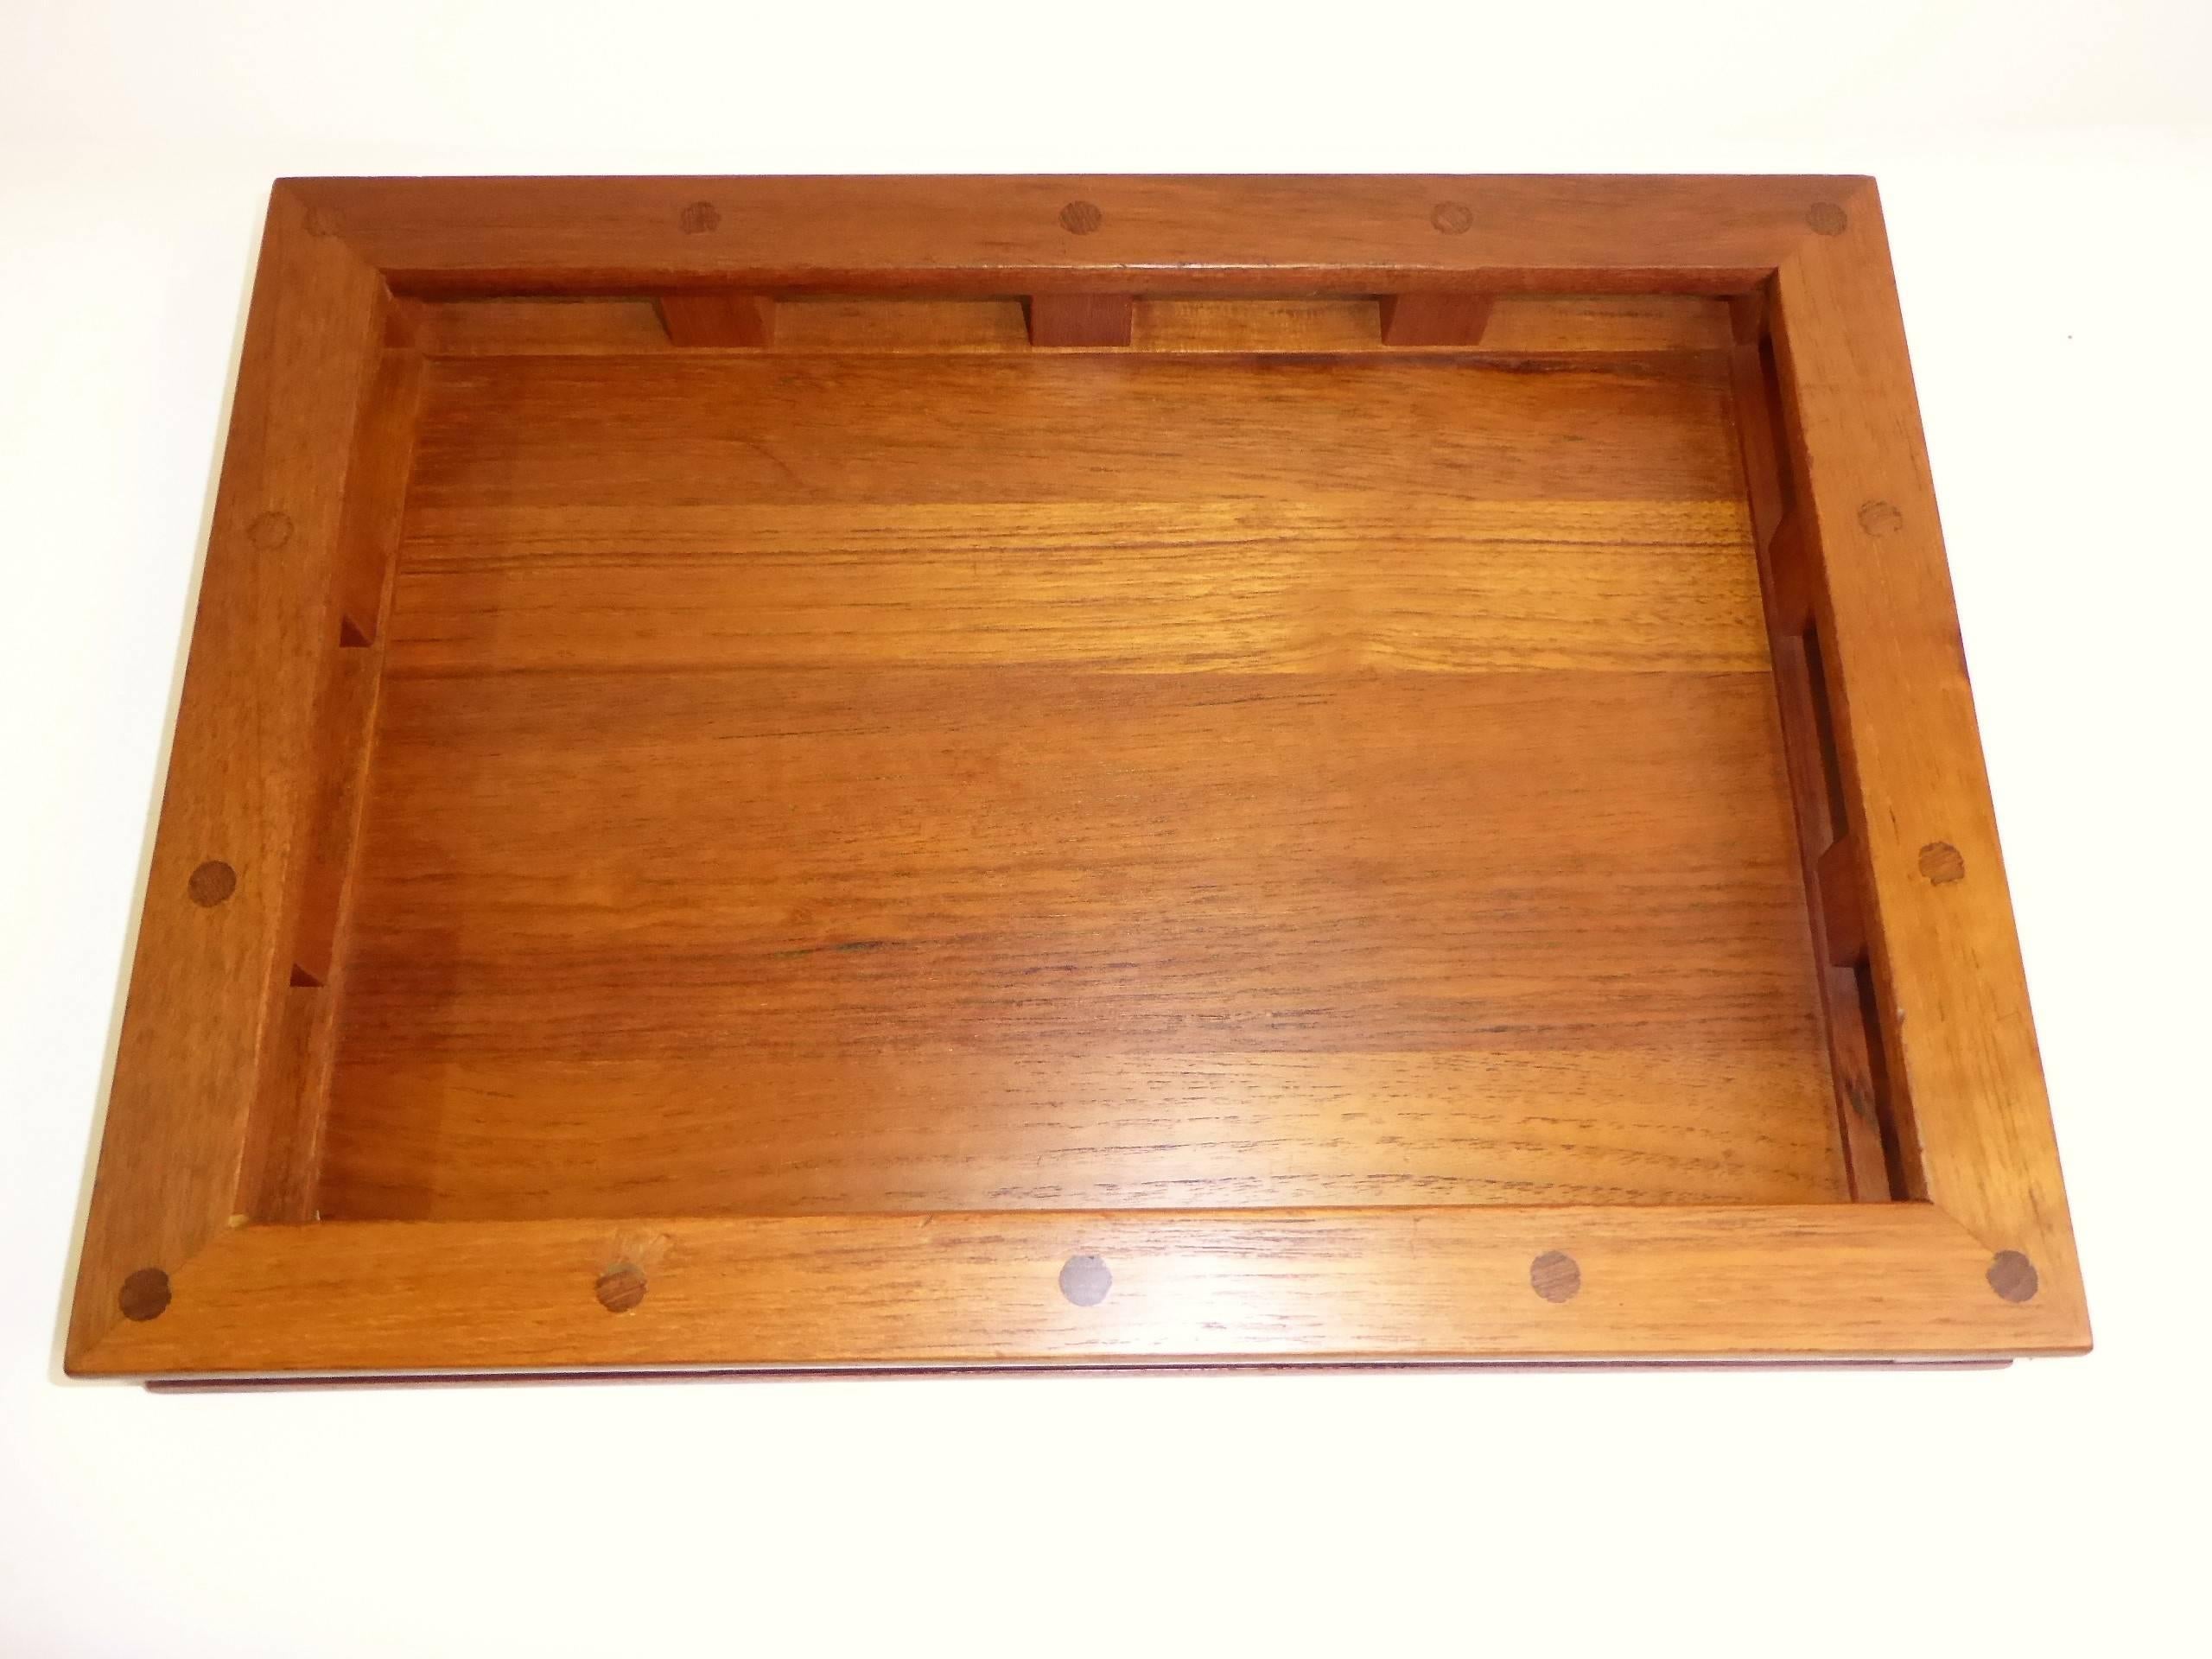 Early Jens Quistgaard Teak Serving Tray with Glass Inserts 3